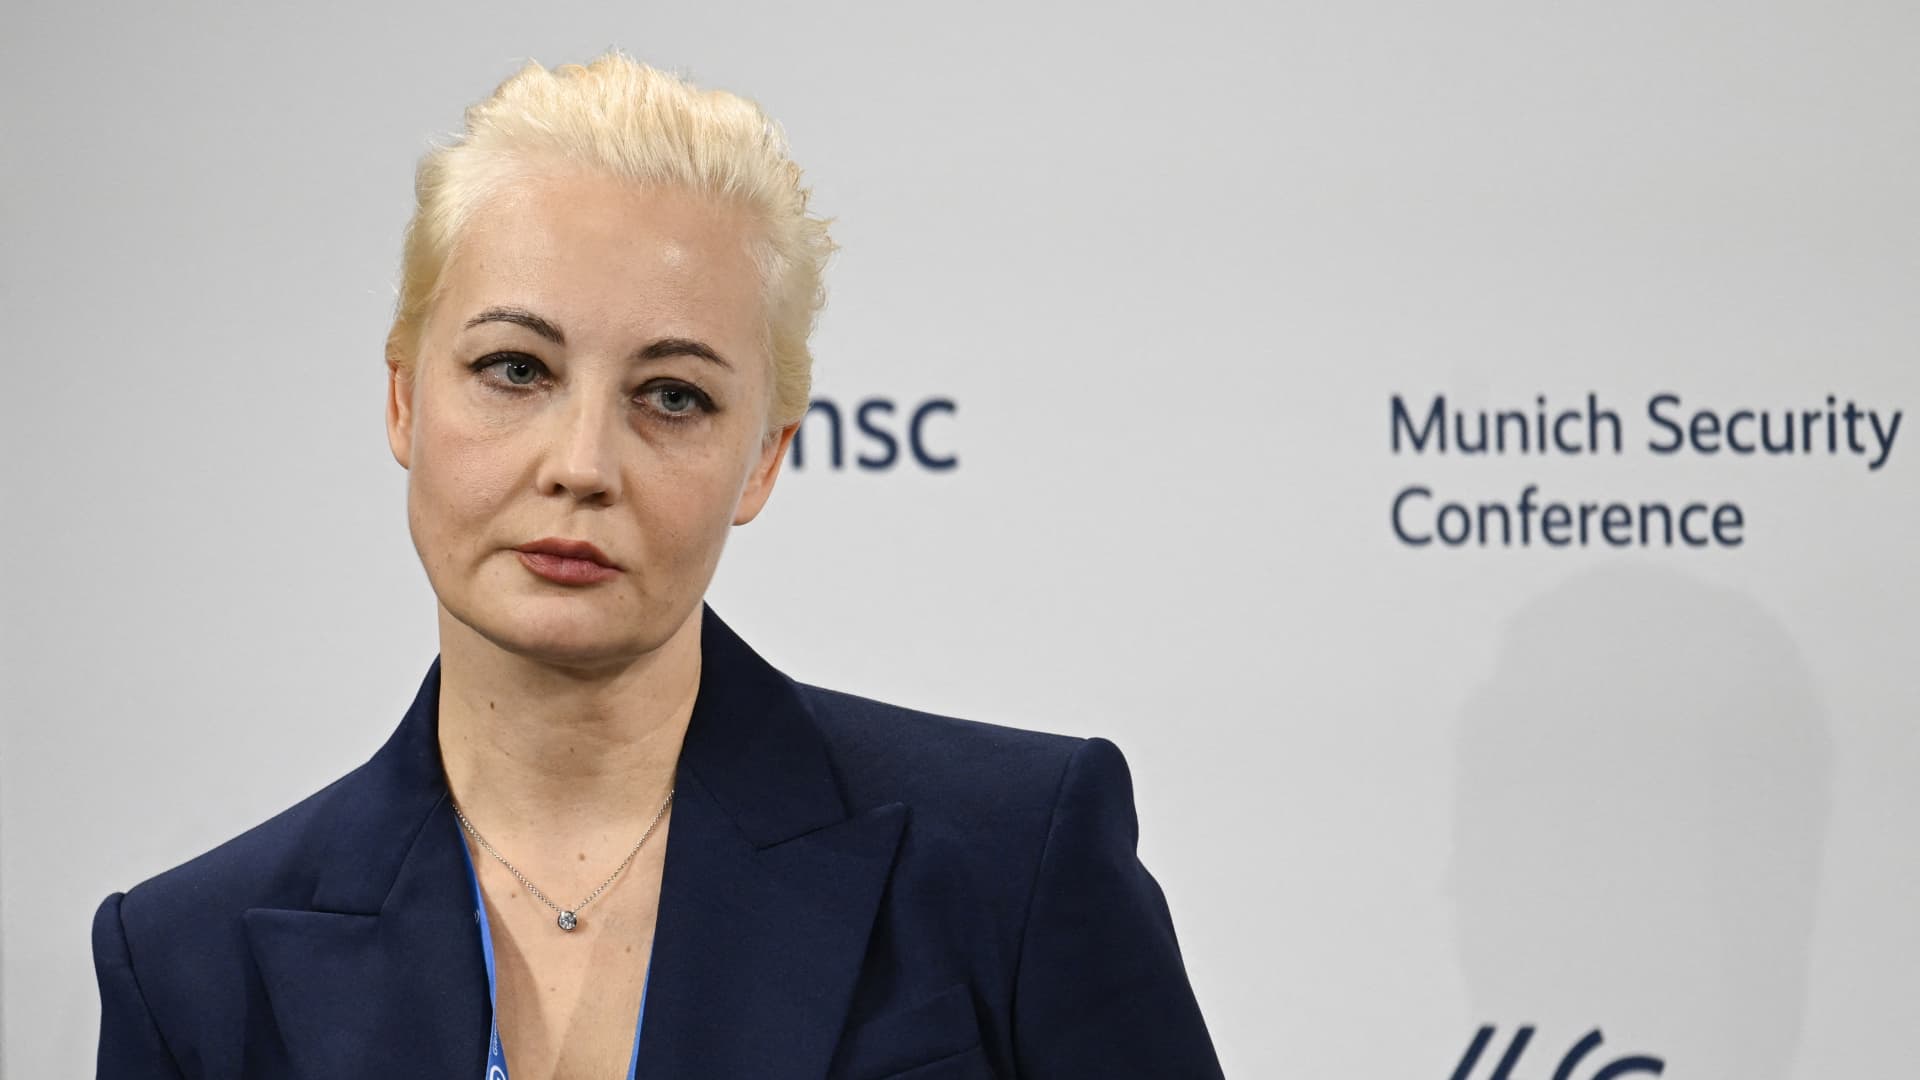 Yulia Navalnaya, wife of late Russian opposition leader Alexei Navalny, attends the Munich Security Conference, on the day Alexei Navalny's death was announced by the prison service of the Yamalo-Nenets region where he had been serving his sentence, in Munich, southern Germany, on Feb. 16, 2024.